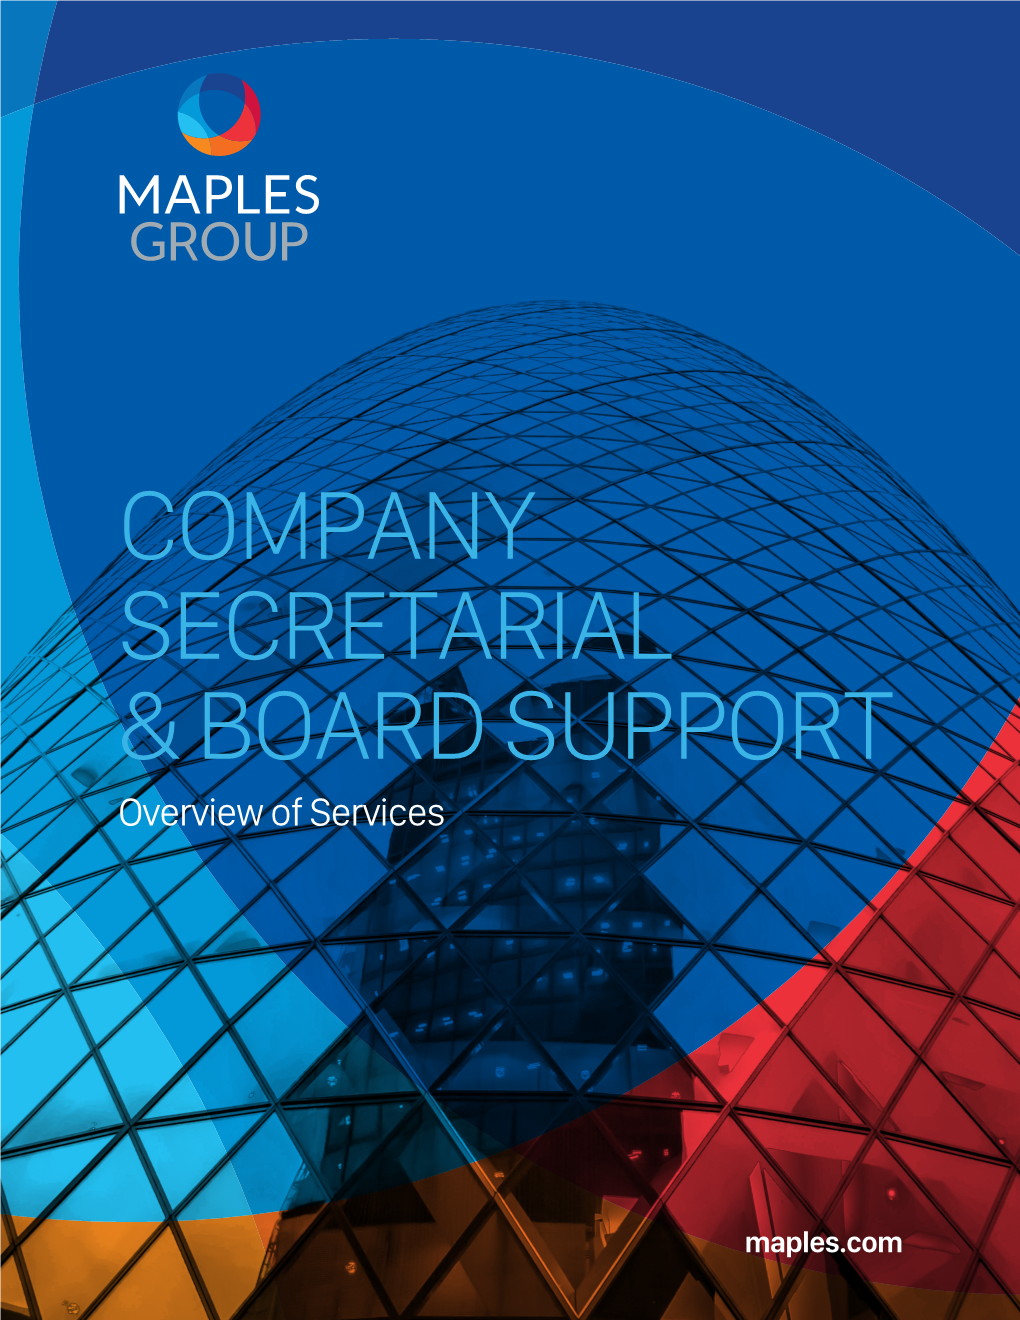 Company Secretarial and Board Support Services, the Maples Group Helps Reduce Administrative Burdens to Allow Companies to Focus on Their Core Business Objectives